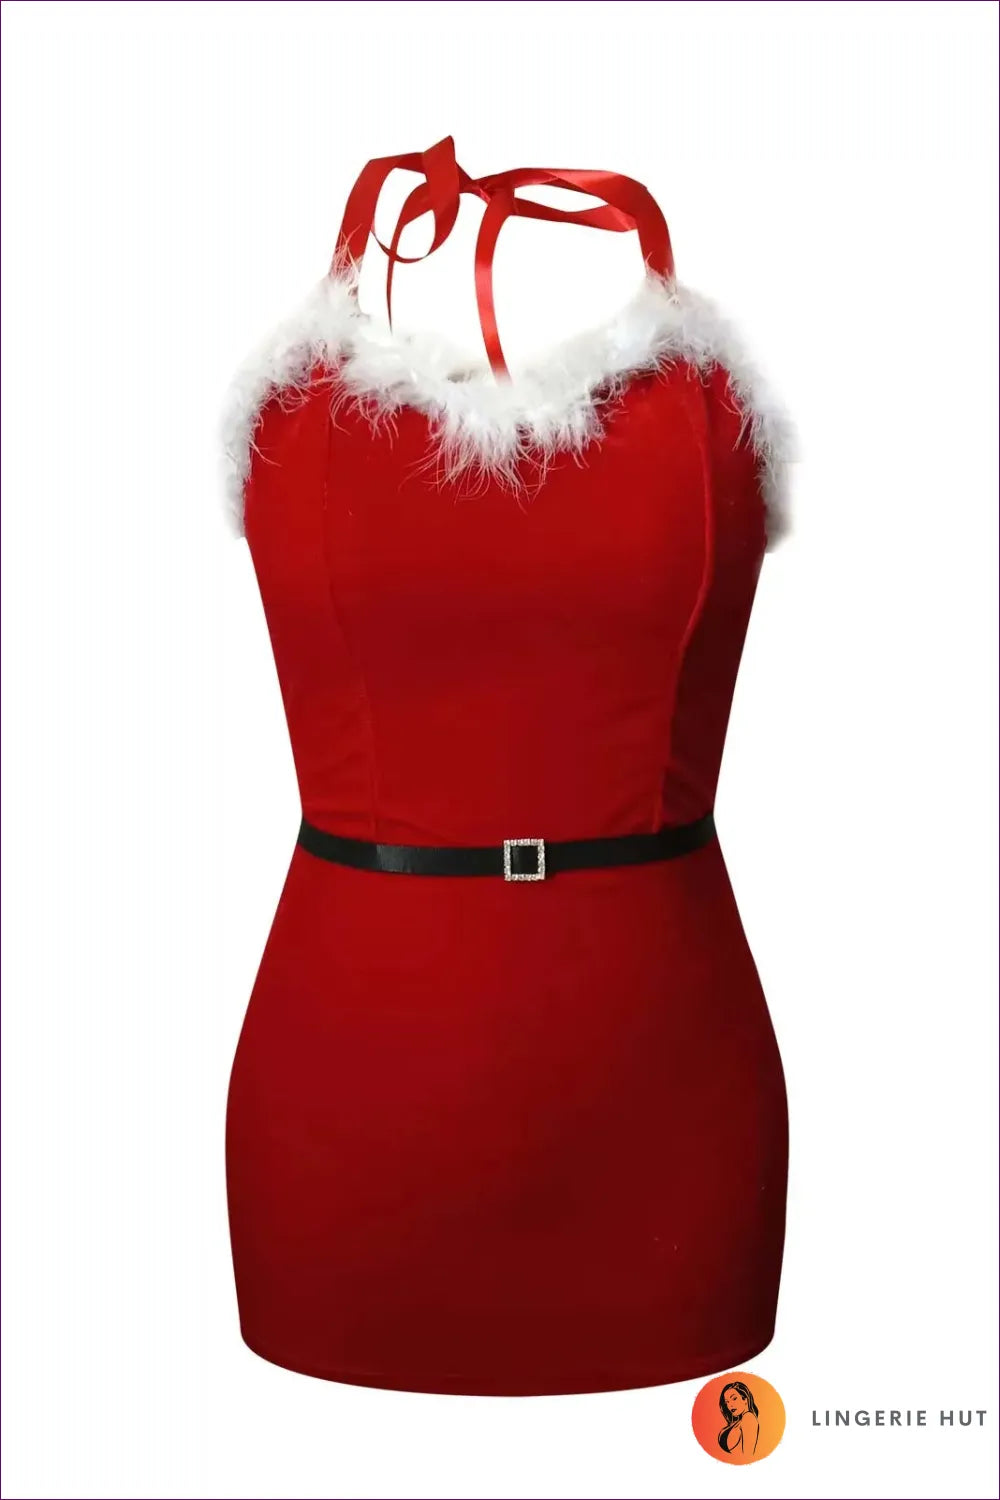 Step Into The Holiday Season With Lingerie Hut’s Yuletide Charm Bodycon Mini Dress. Fit, Fur Trim,